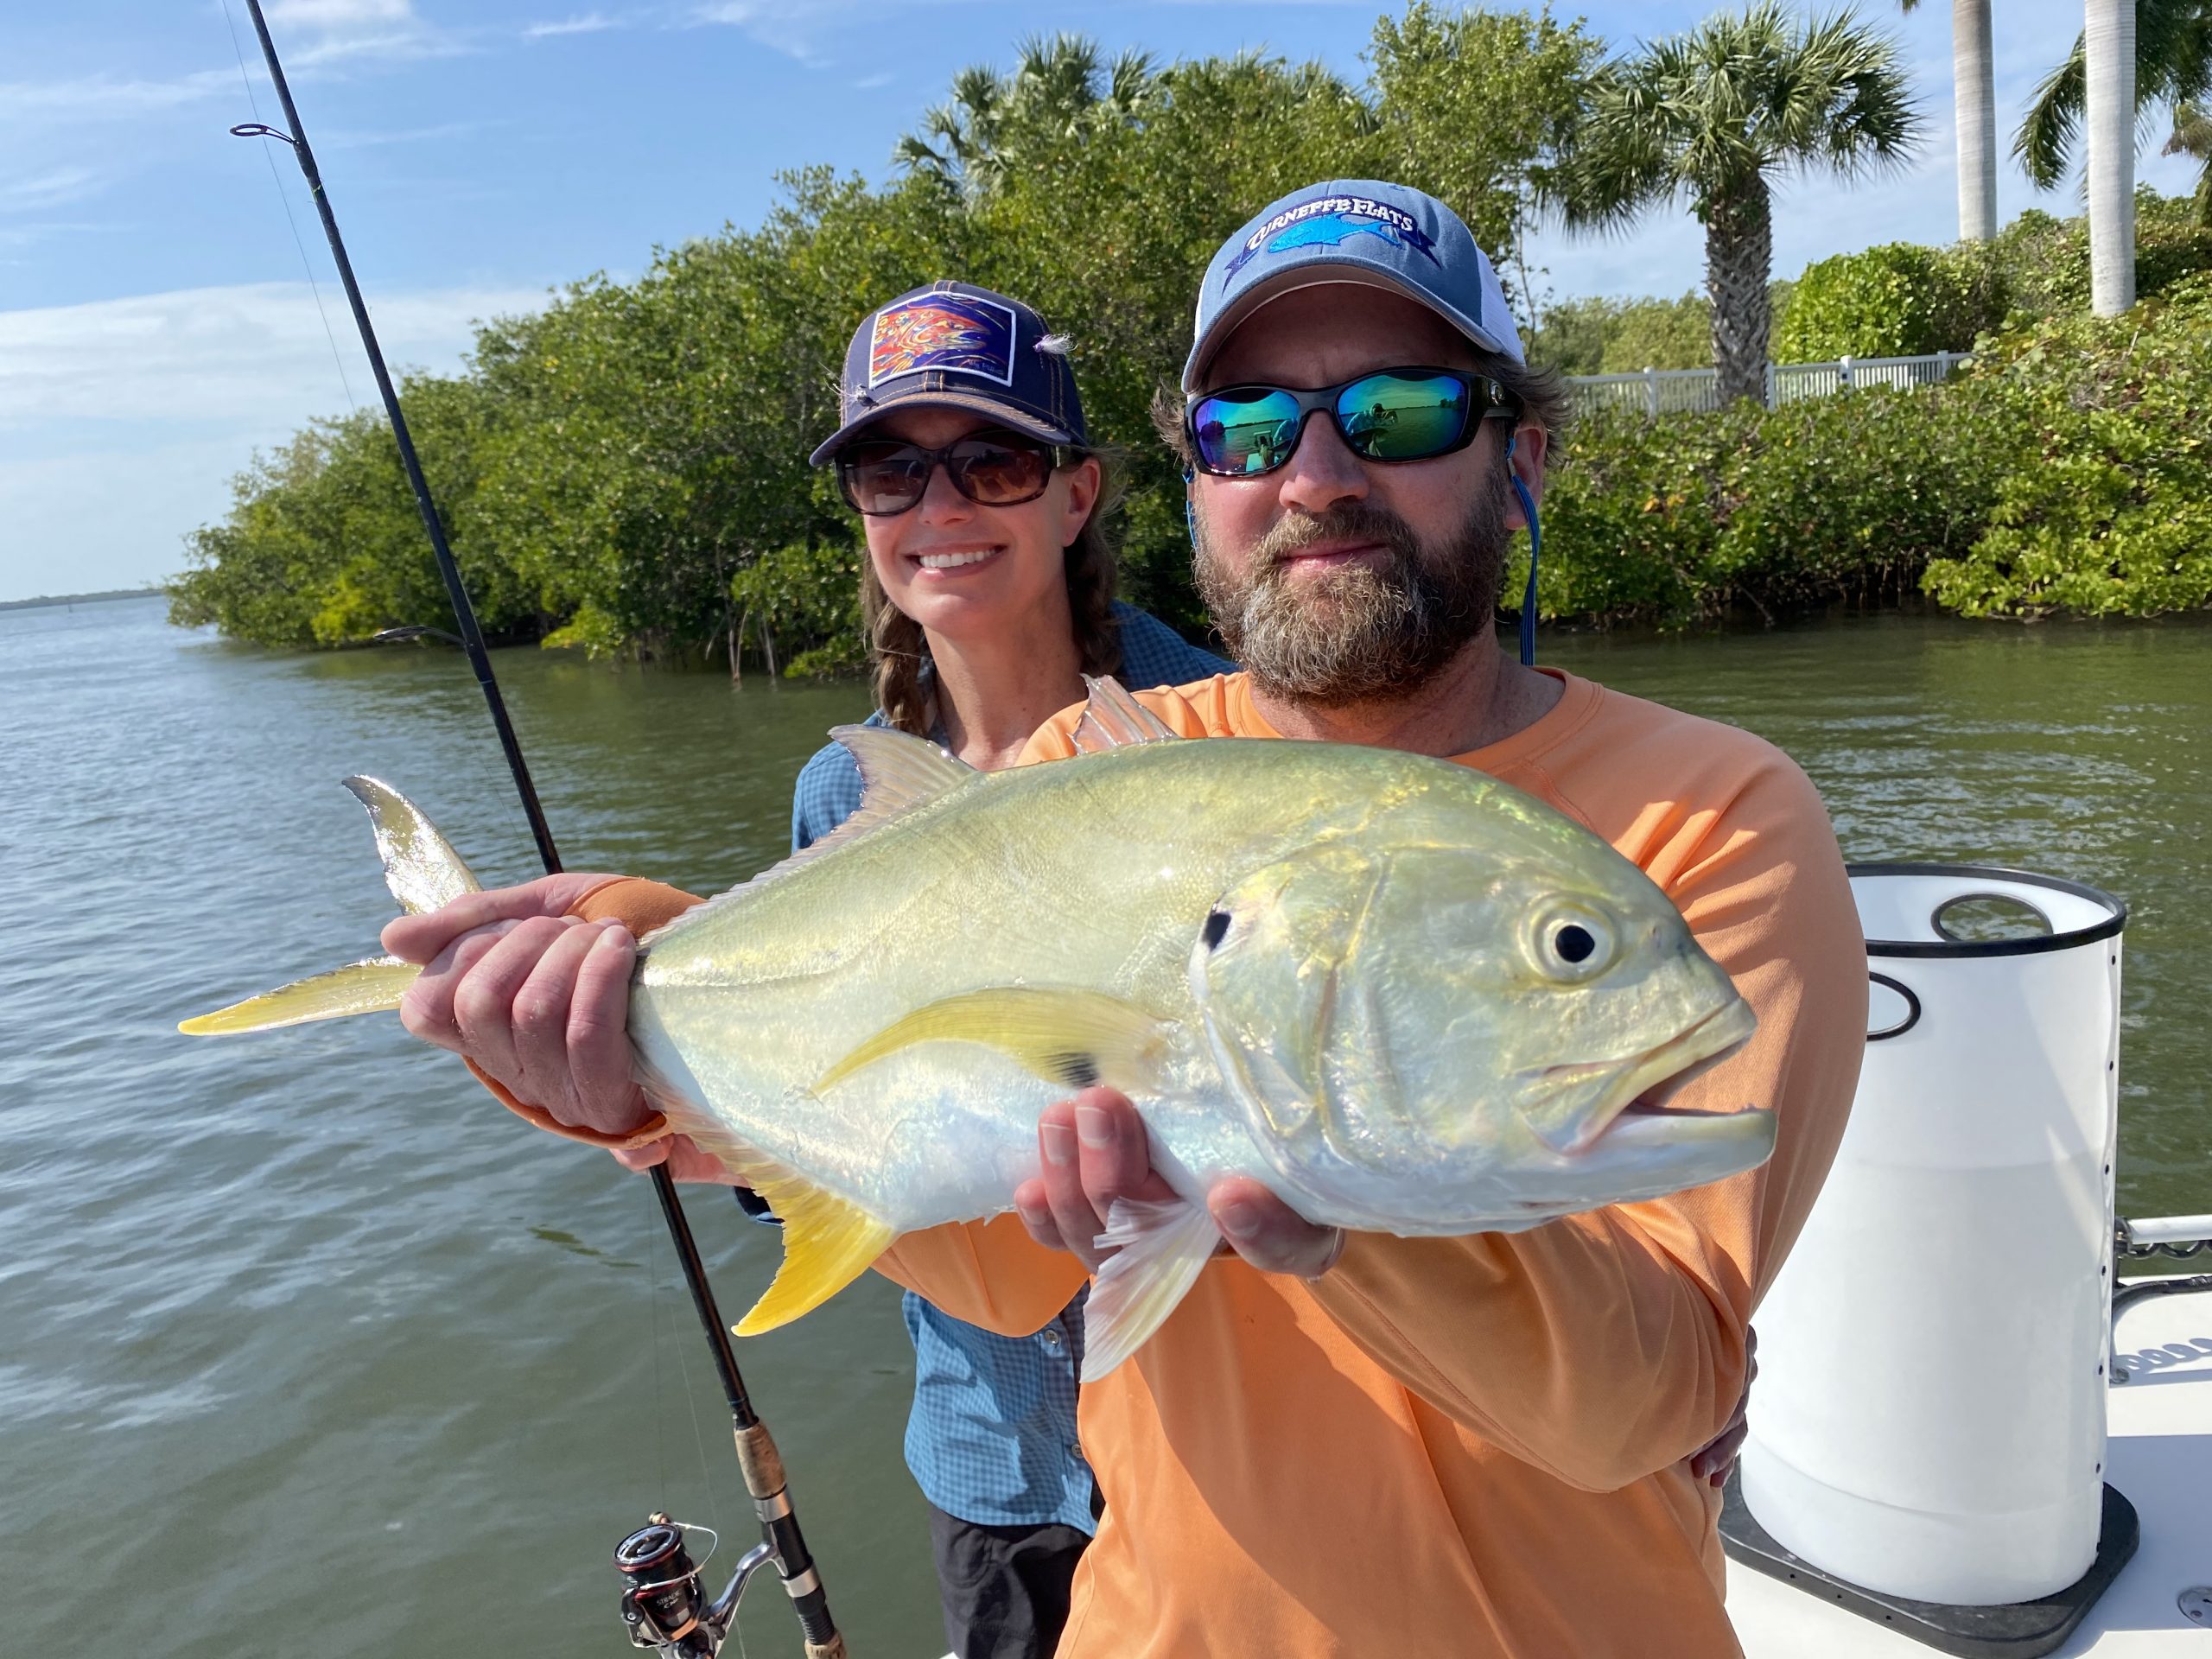 An angler holds a jack crevalle caught on spinning gear